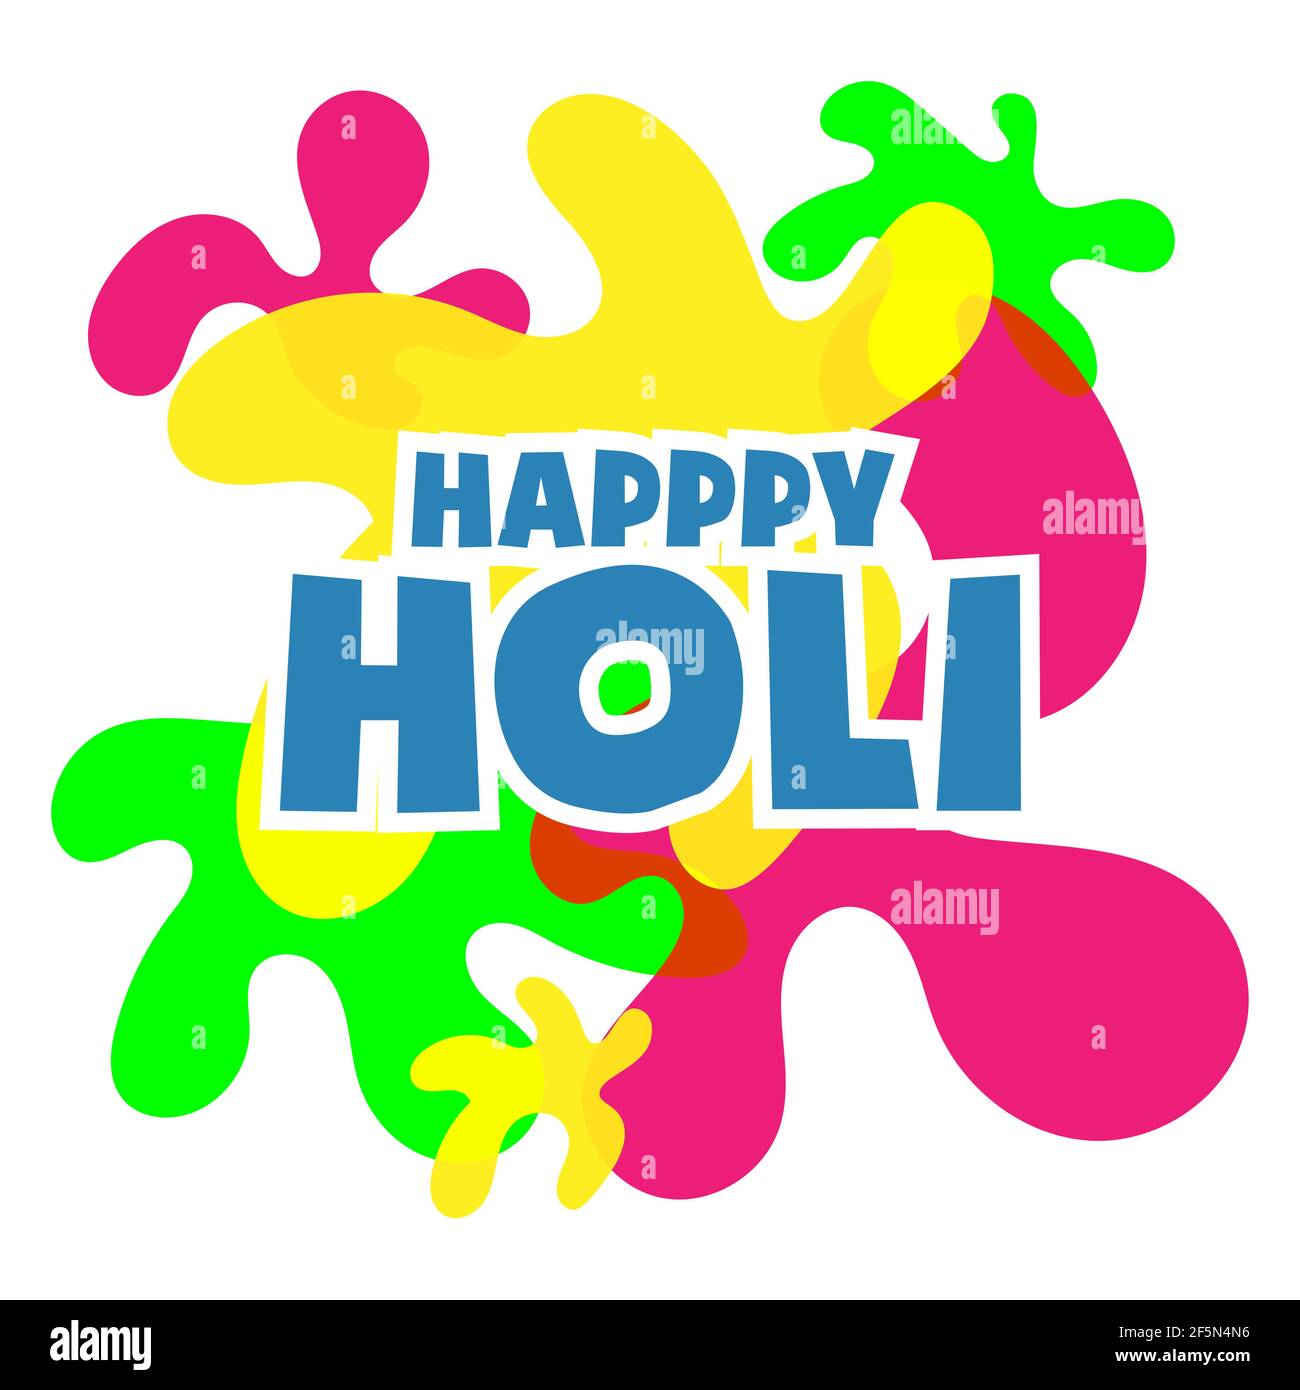 Holi poster Stock Vector Images - Alamy